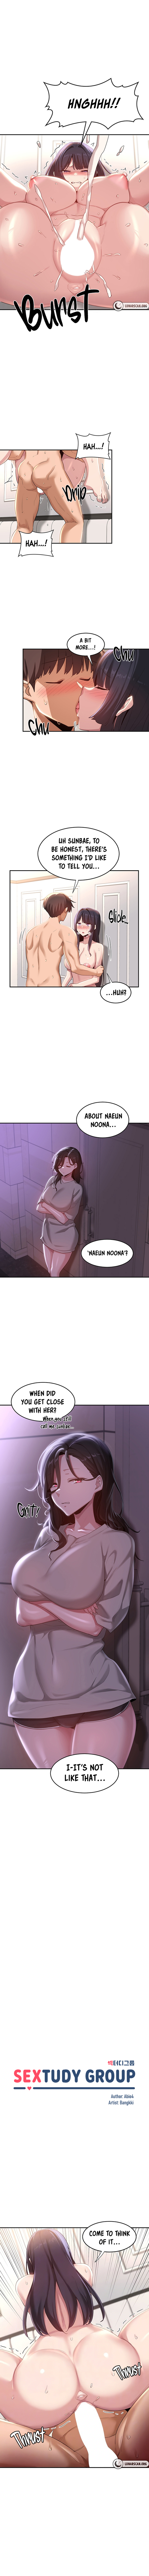 Panel Image 1 for chapter 78 of manhwa Sex Study Group on read.oppai.stream